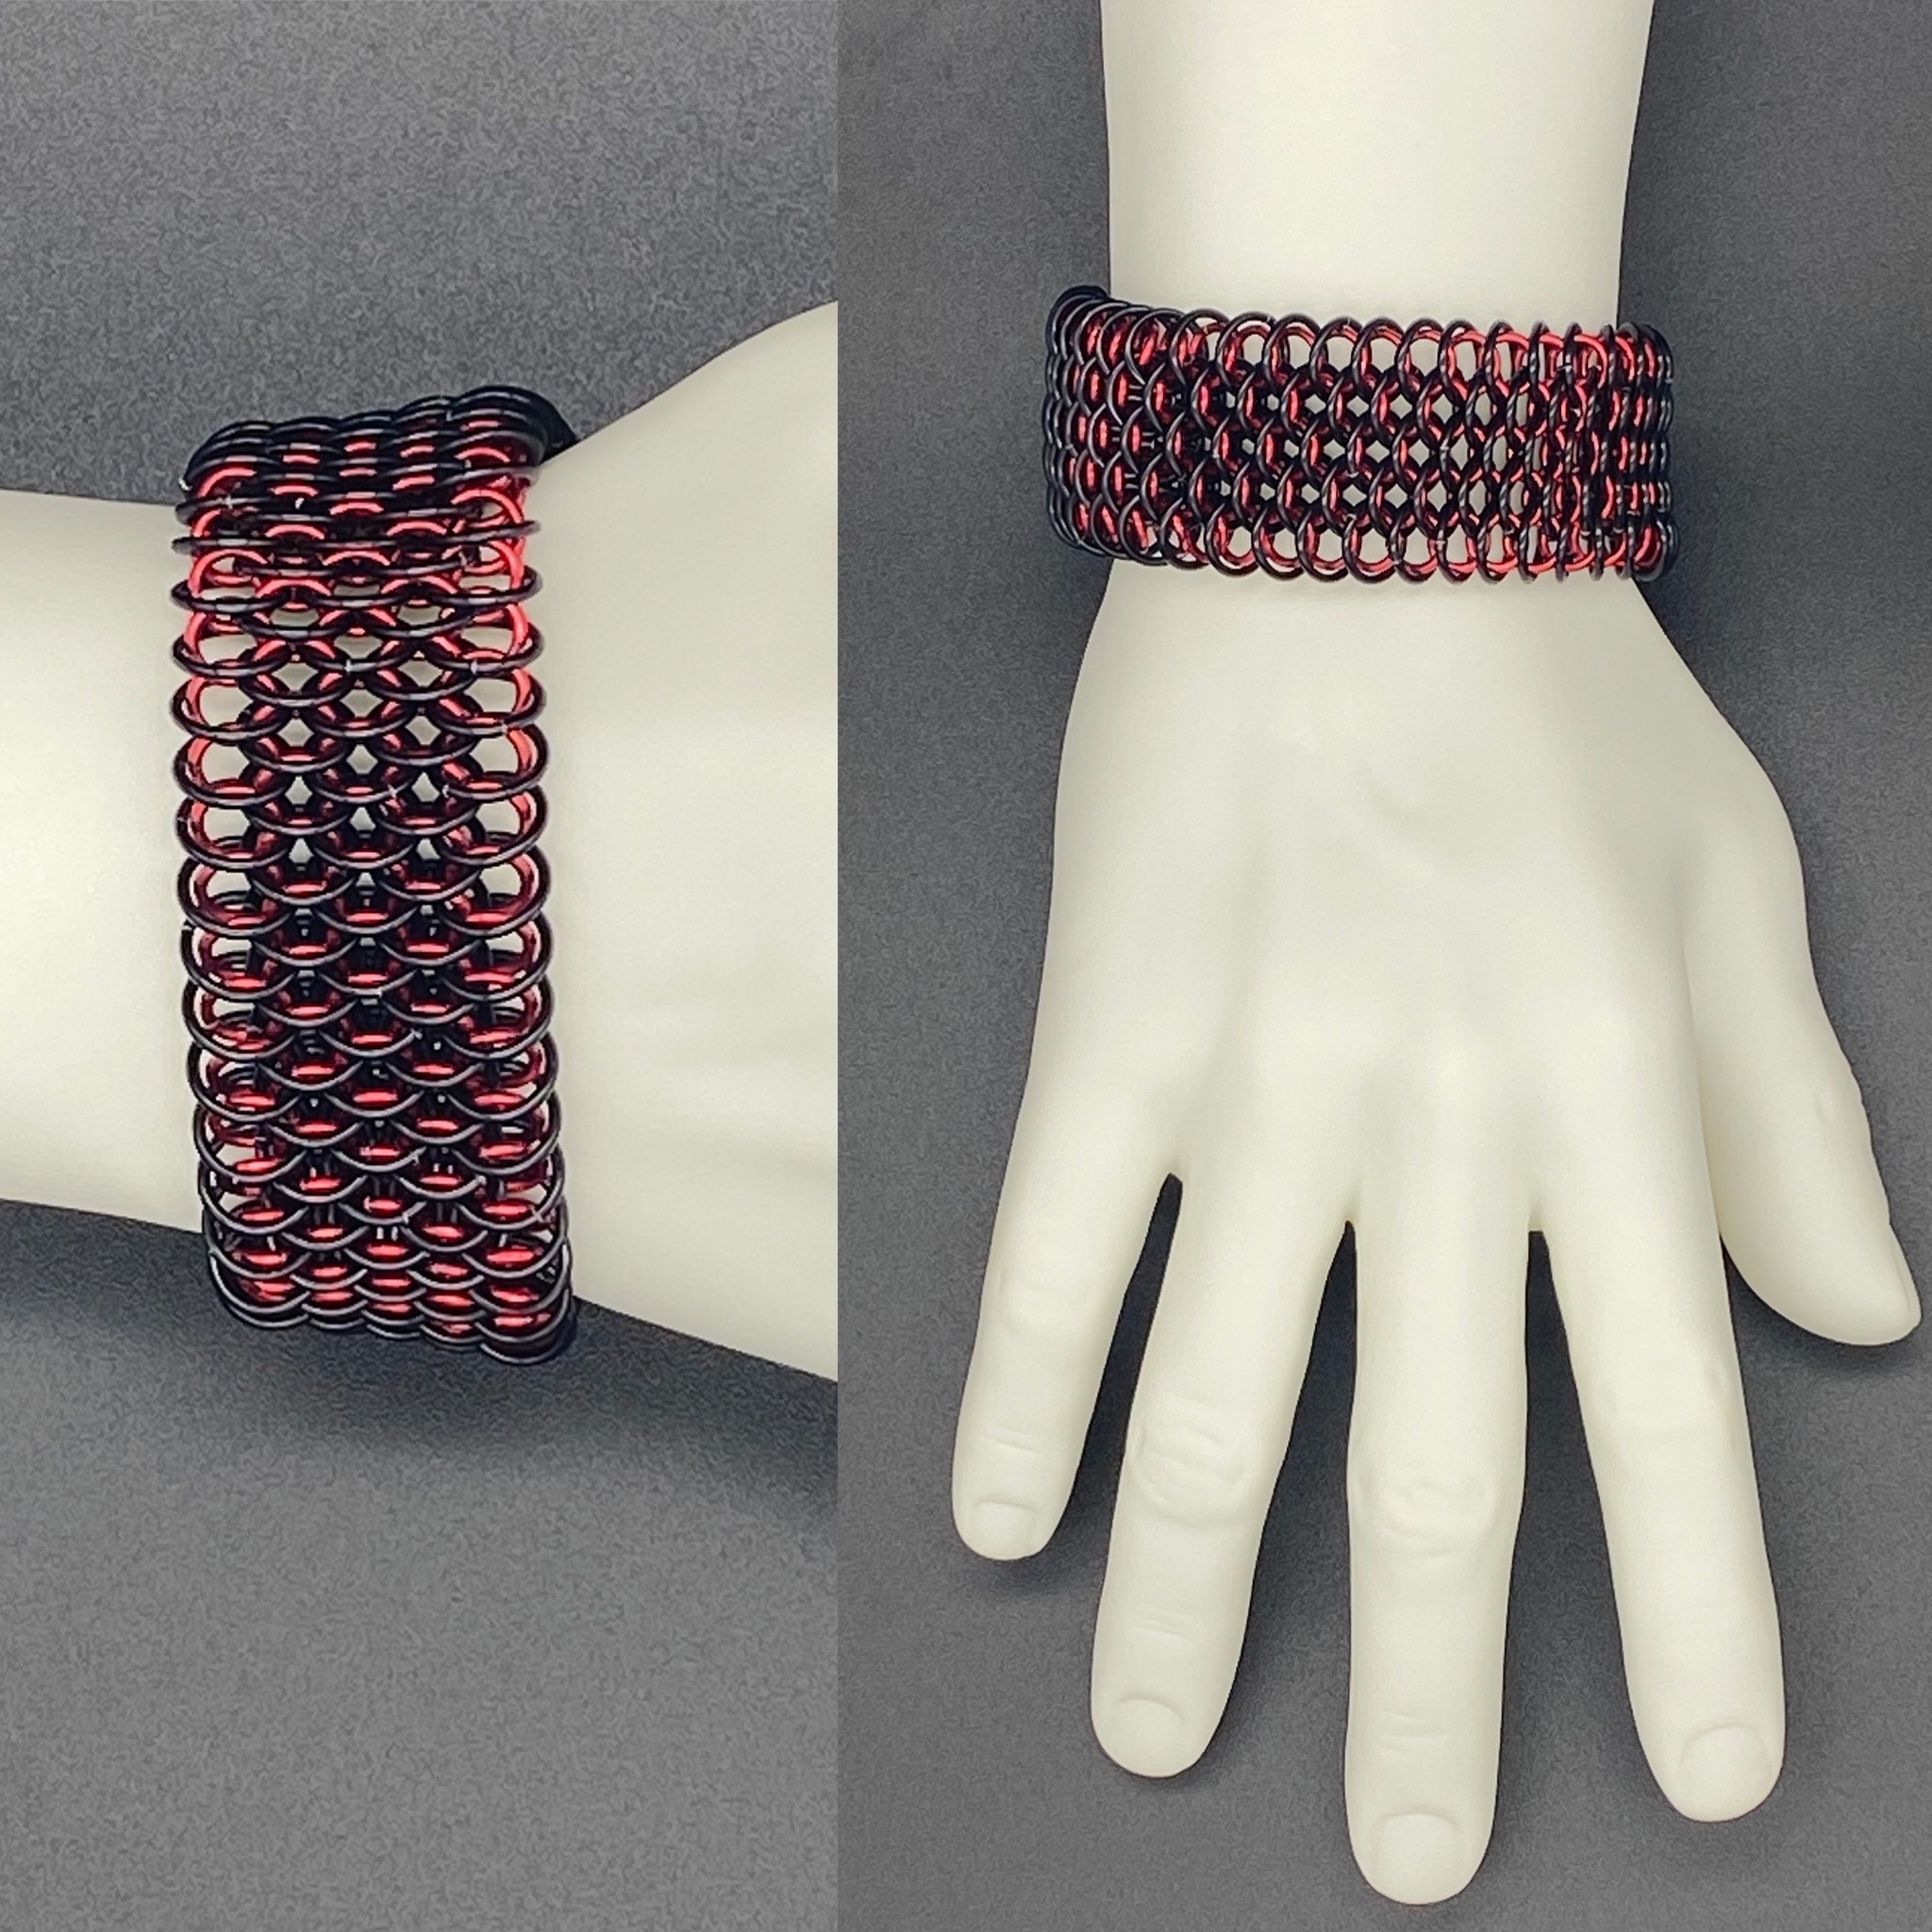 dragonscale chainmail bracelet bohemia handcrafted jewelry| Alibaba.com